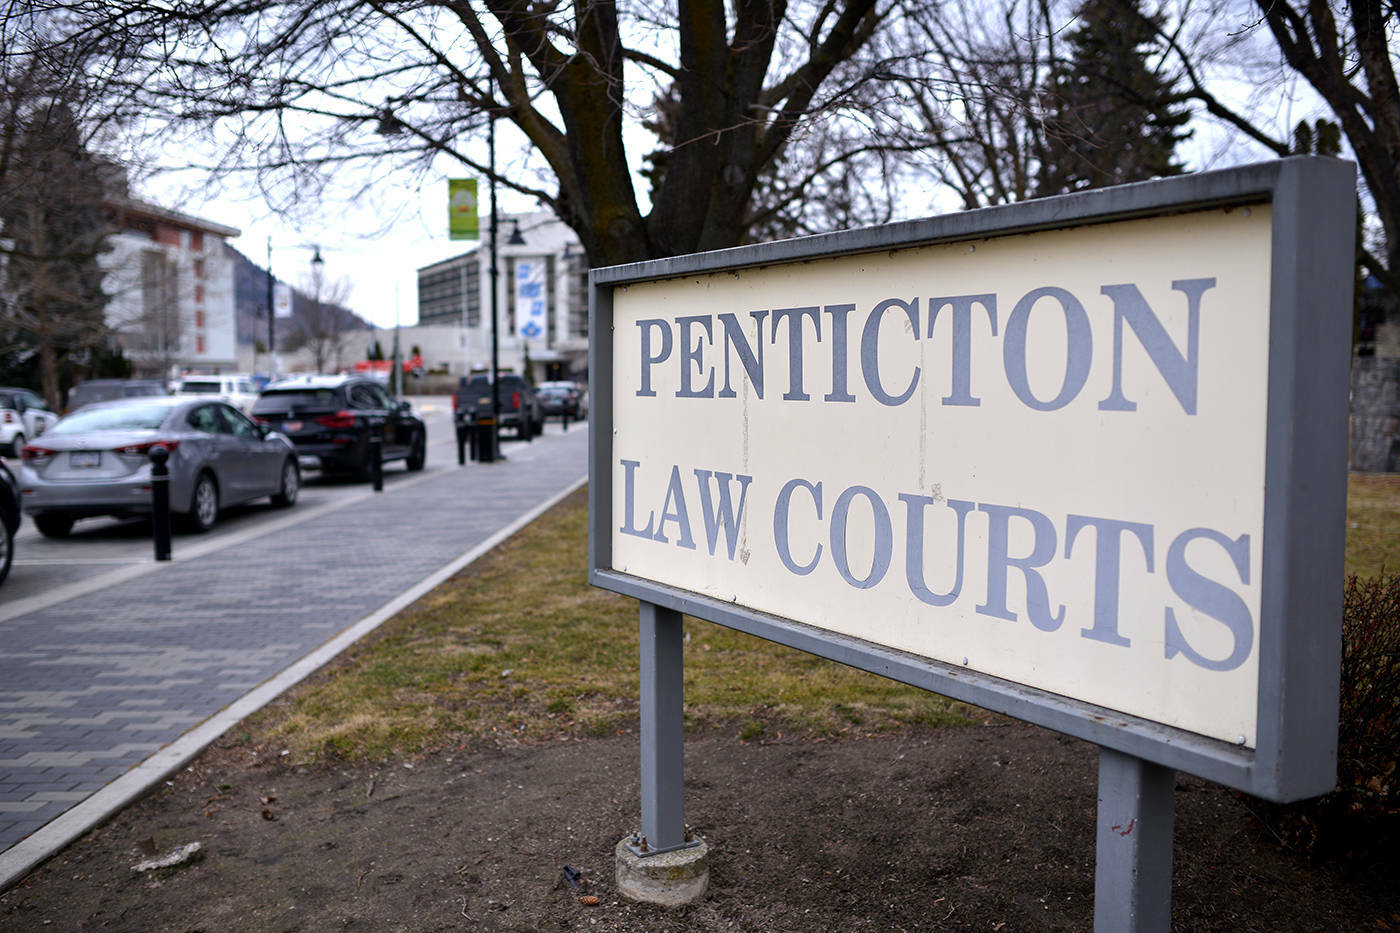 Penticton’s Law Courts. (Western News File)